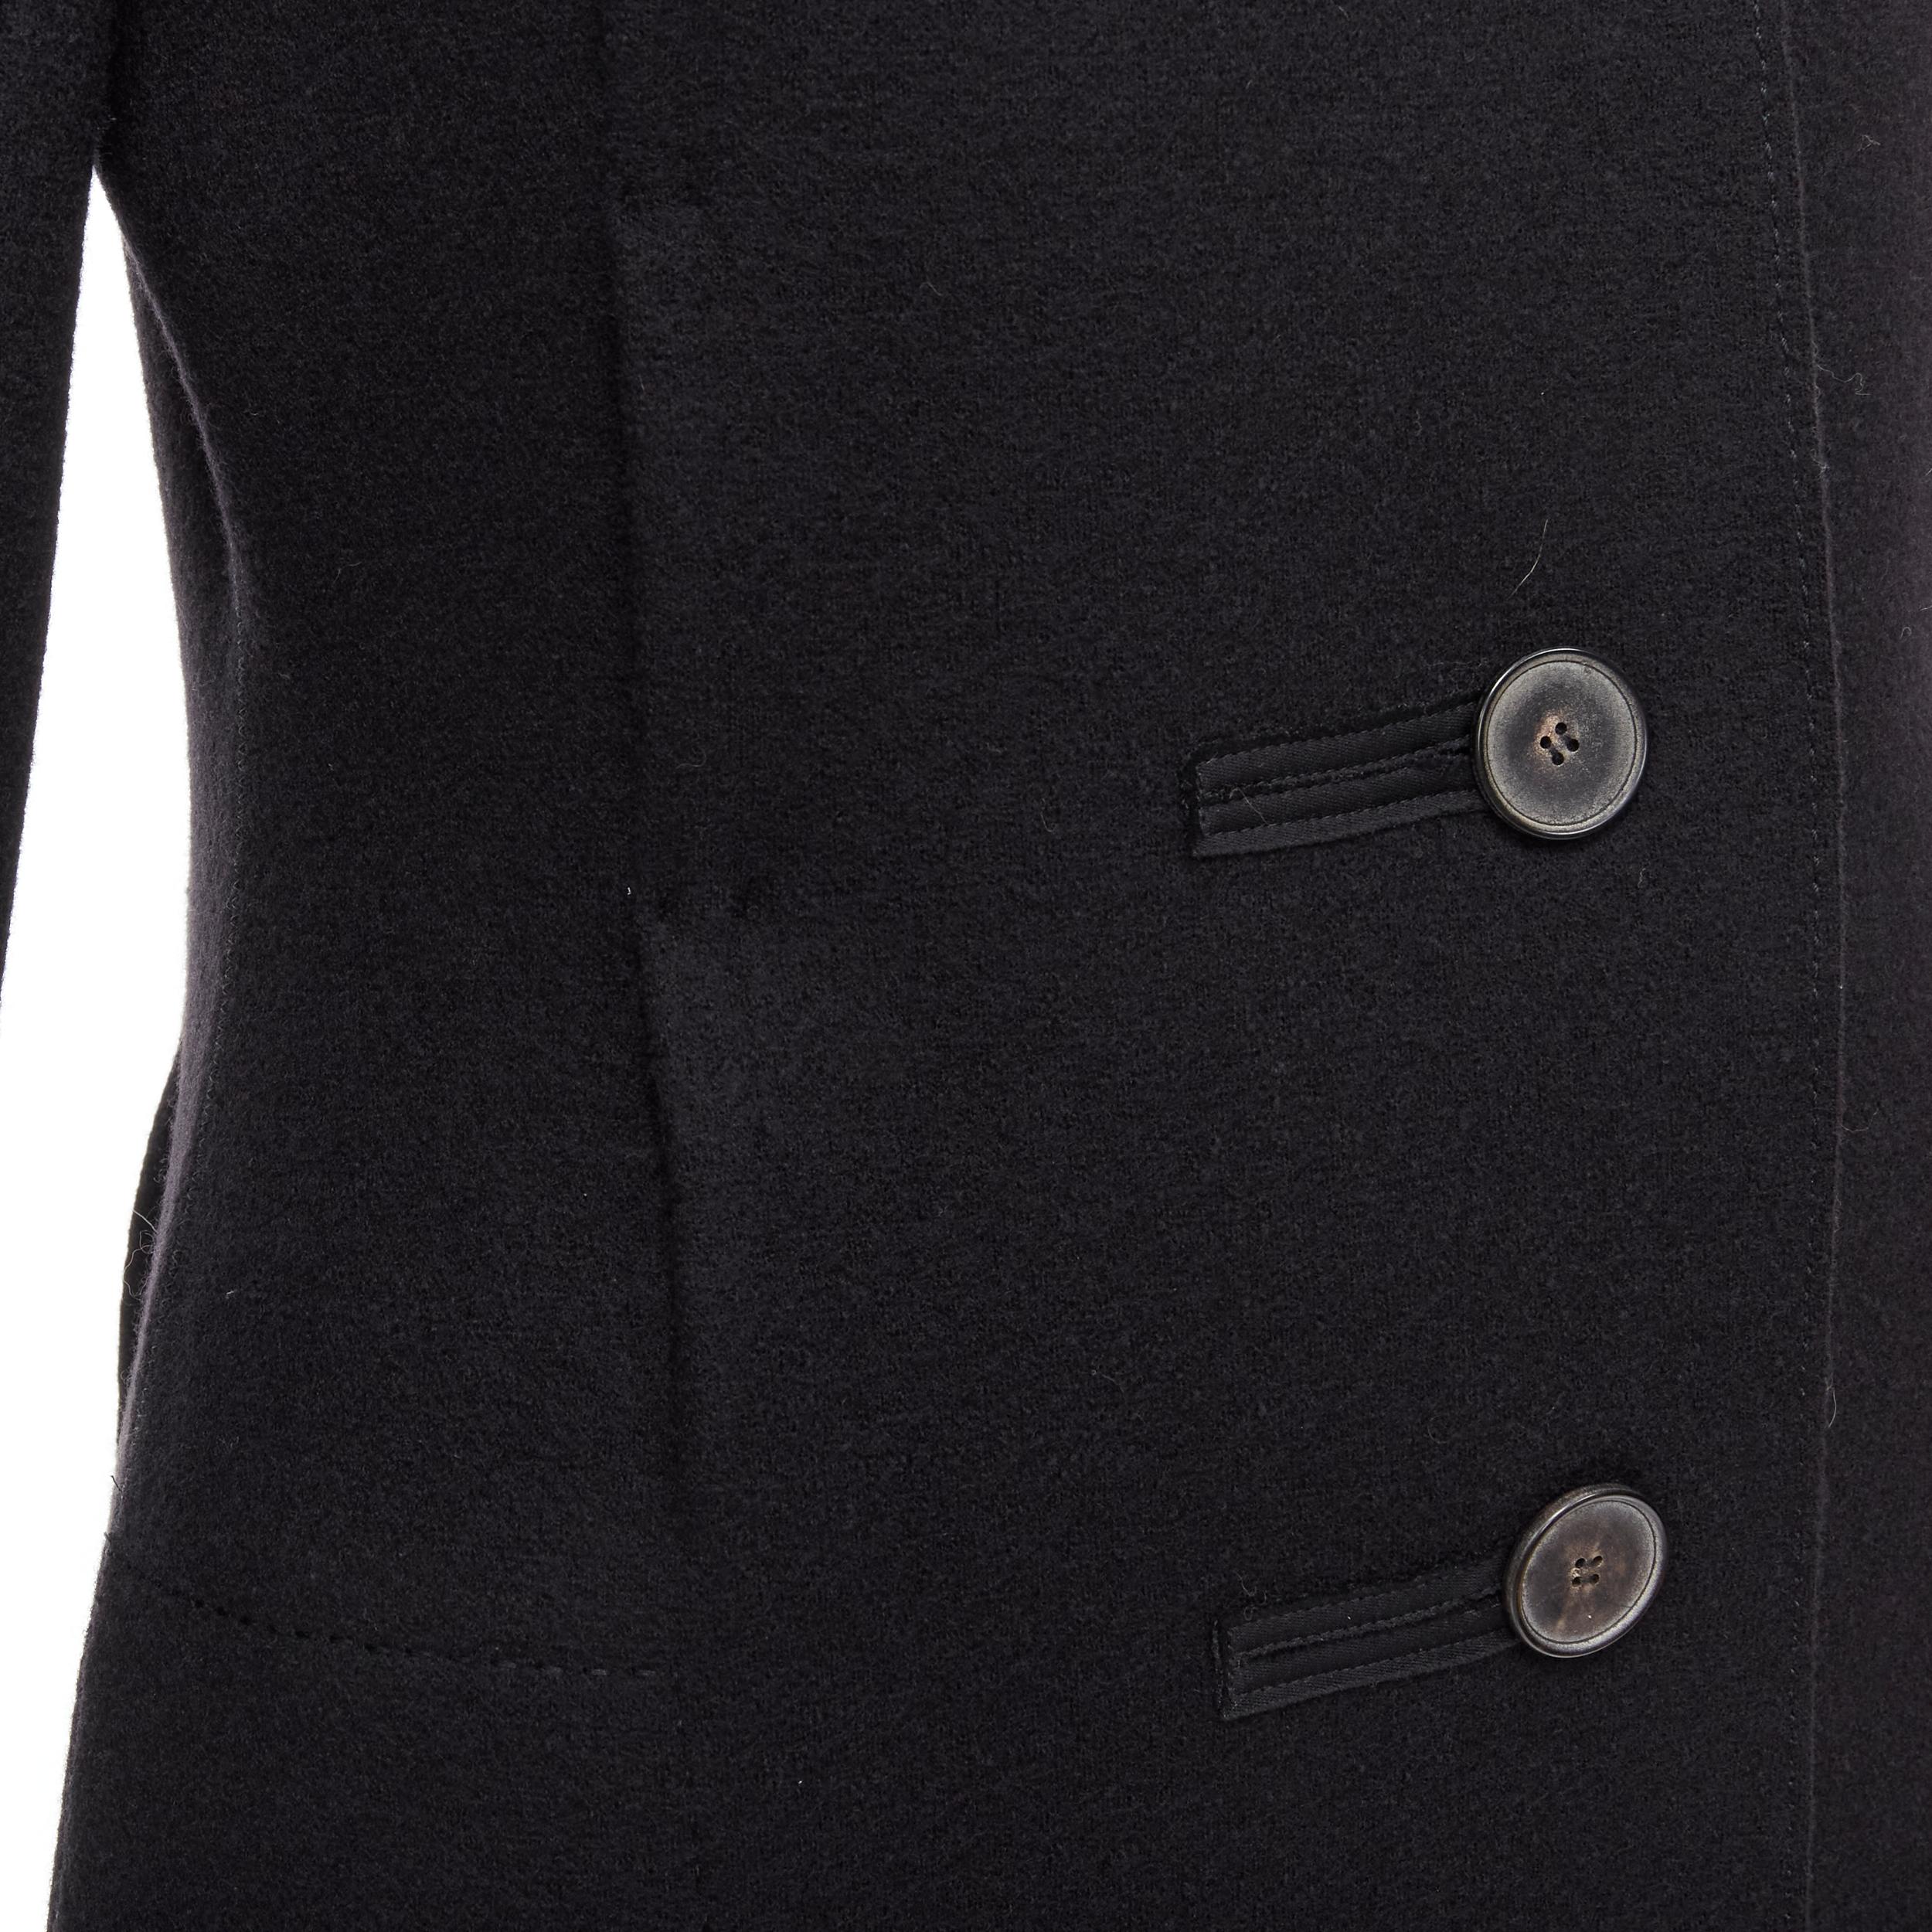 LANVIN Alber Elbaz 2004 black wool pinched darts button front fitted coat FR38 S For Sale 2